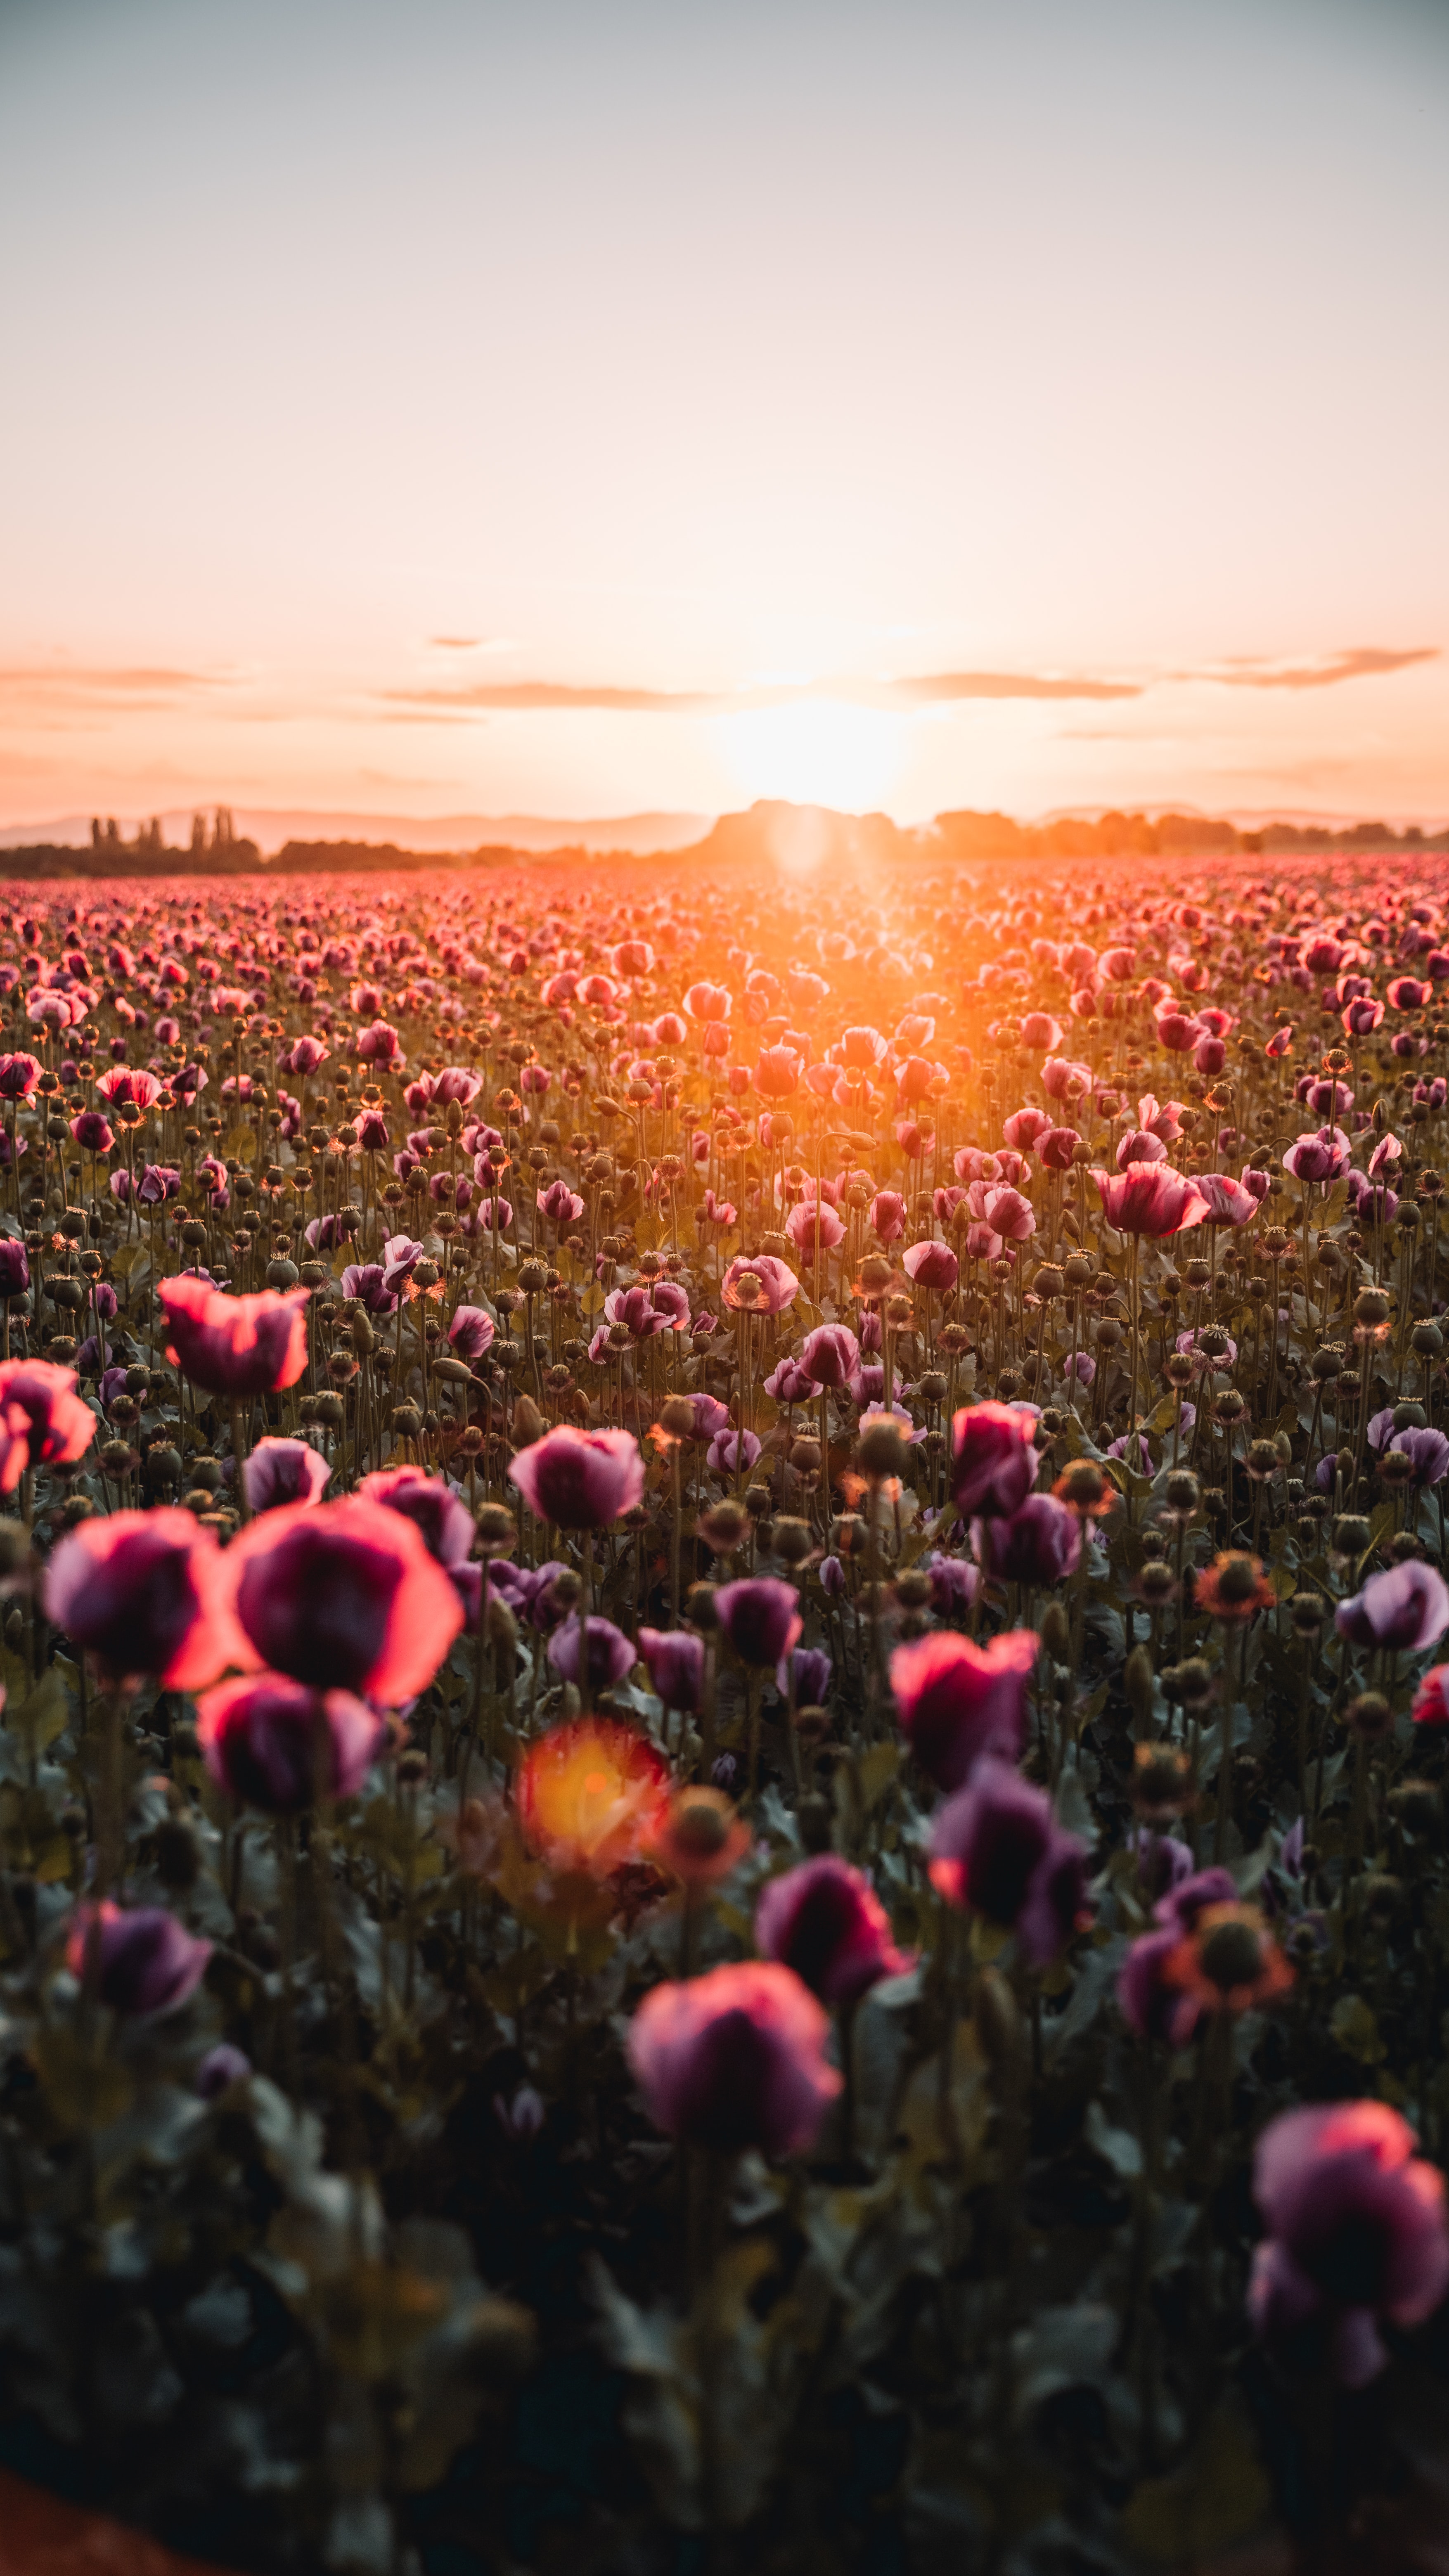 Full HD sunset, flowers, poppies, beams, rays, dahl, distance, wildflowers